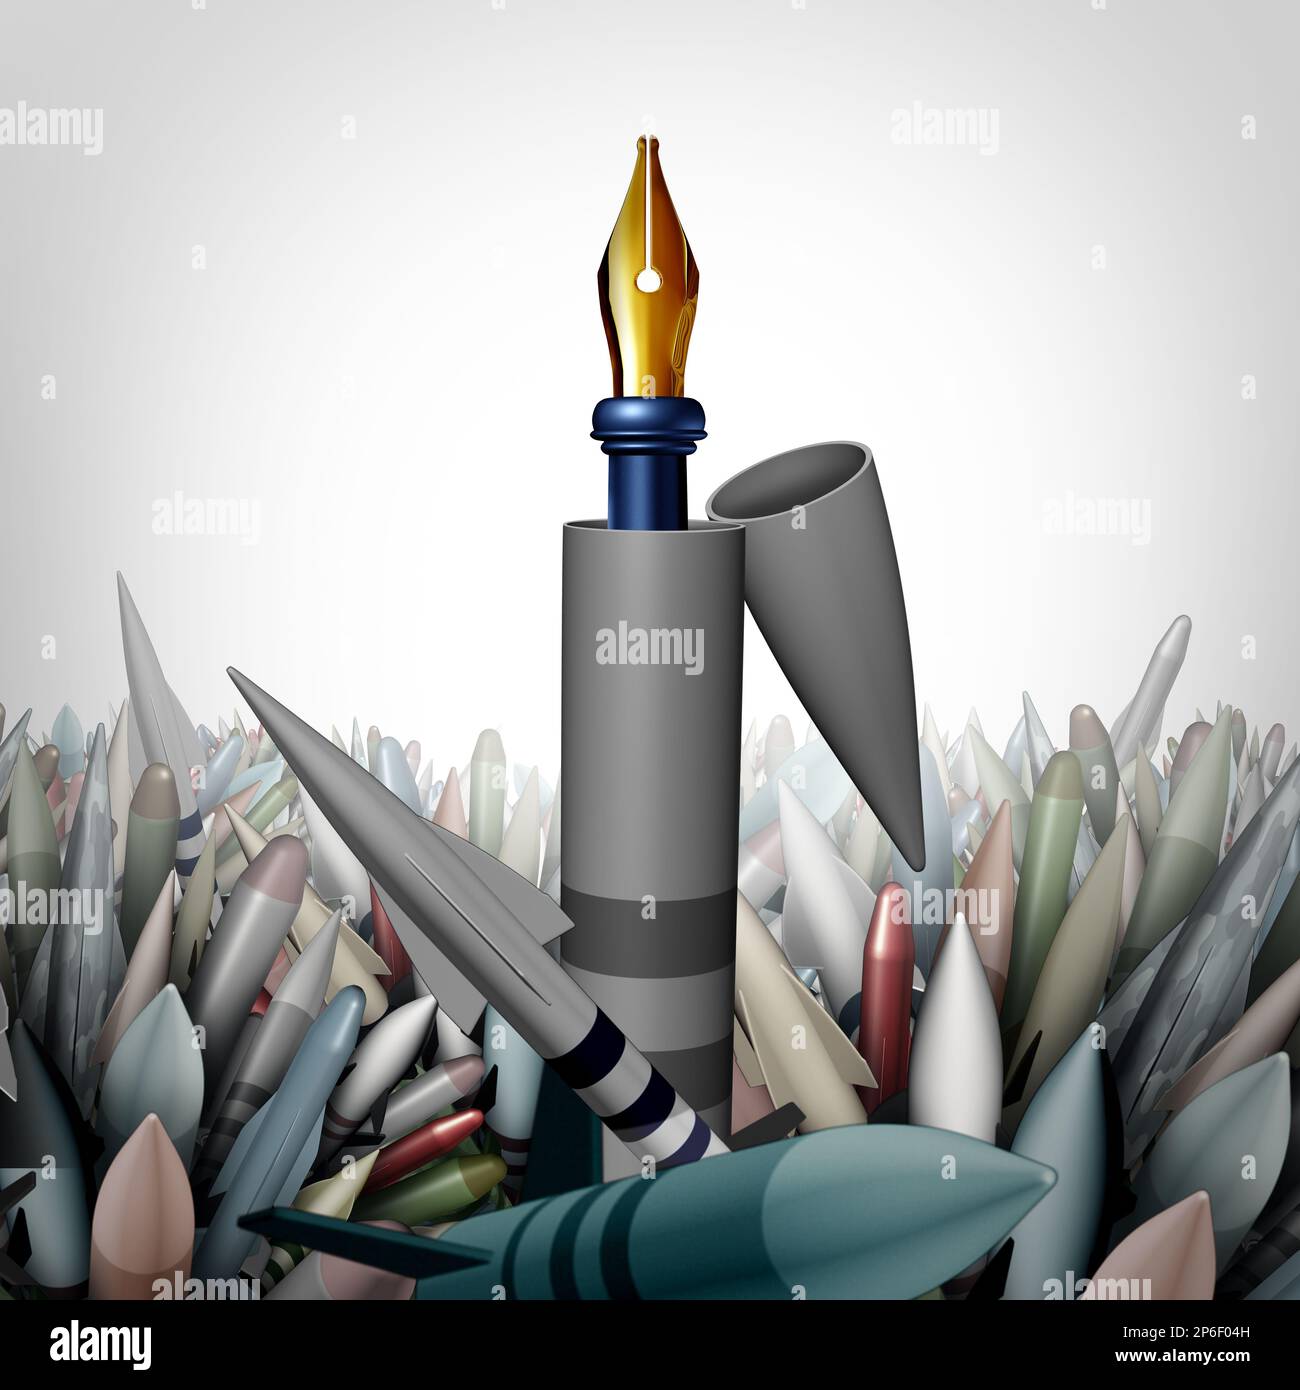 Diplomacy Over Conflict from War to peace concept with a missile bomb and a pen as a metaphor for negotiating through dialogue and reconciliation Stock Photo